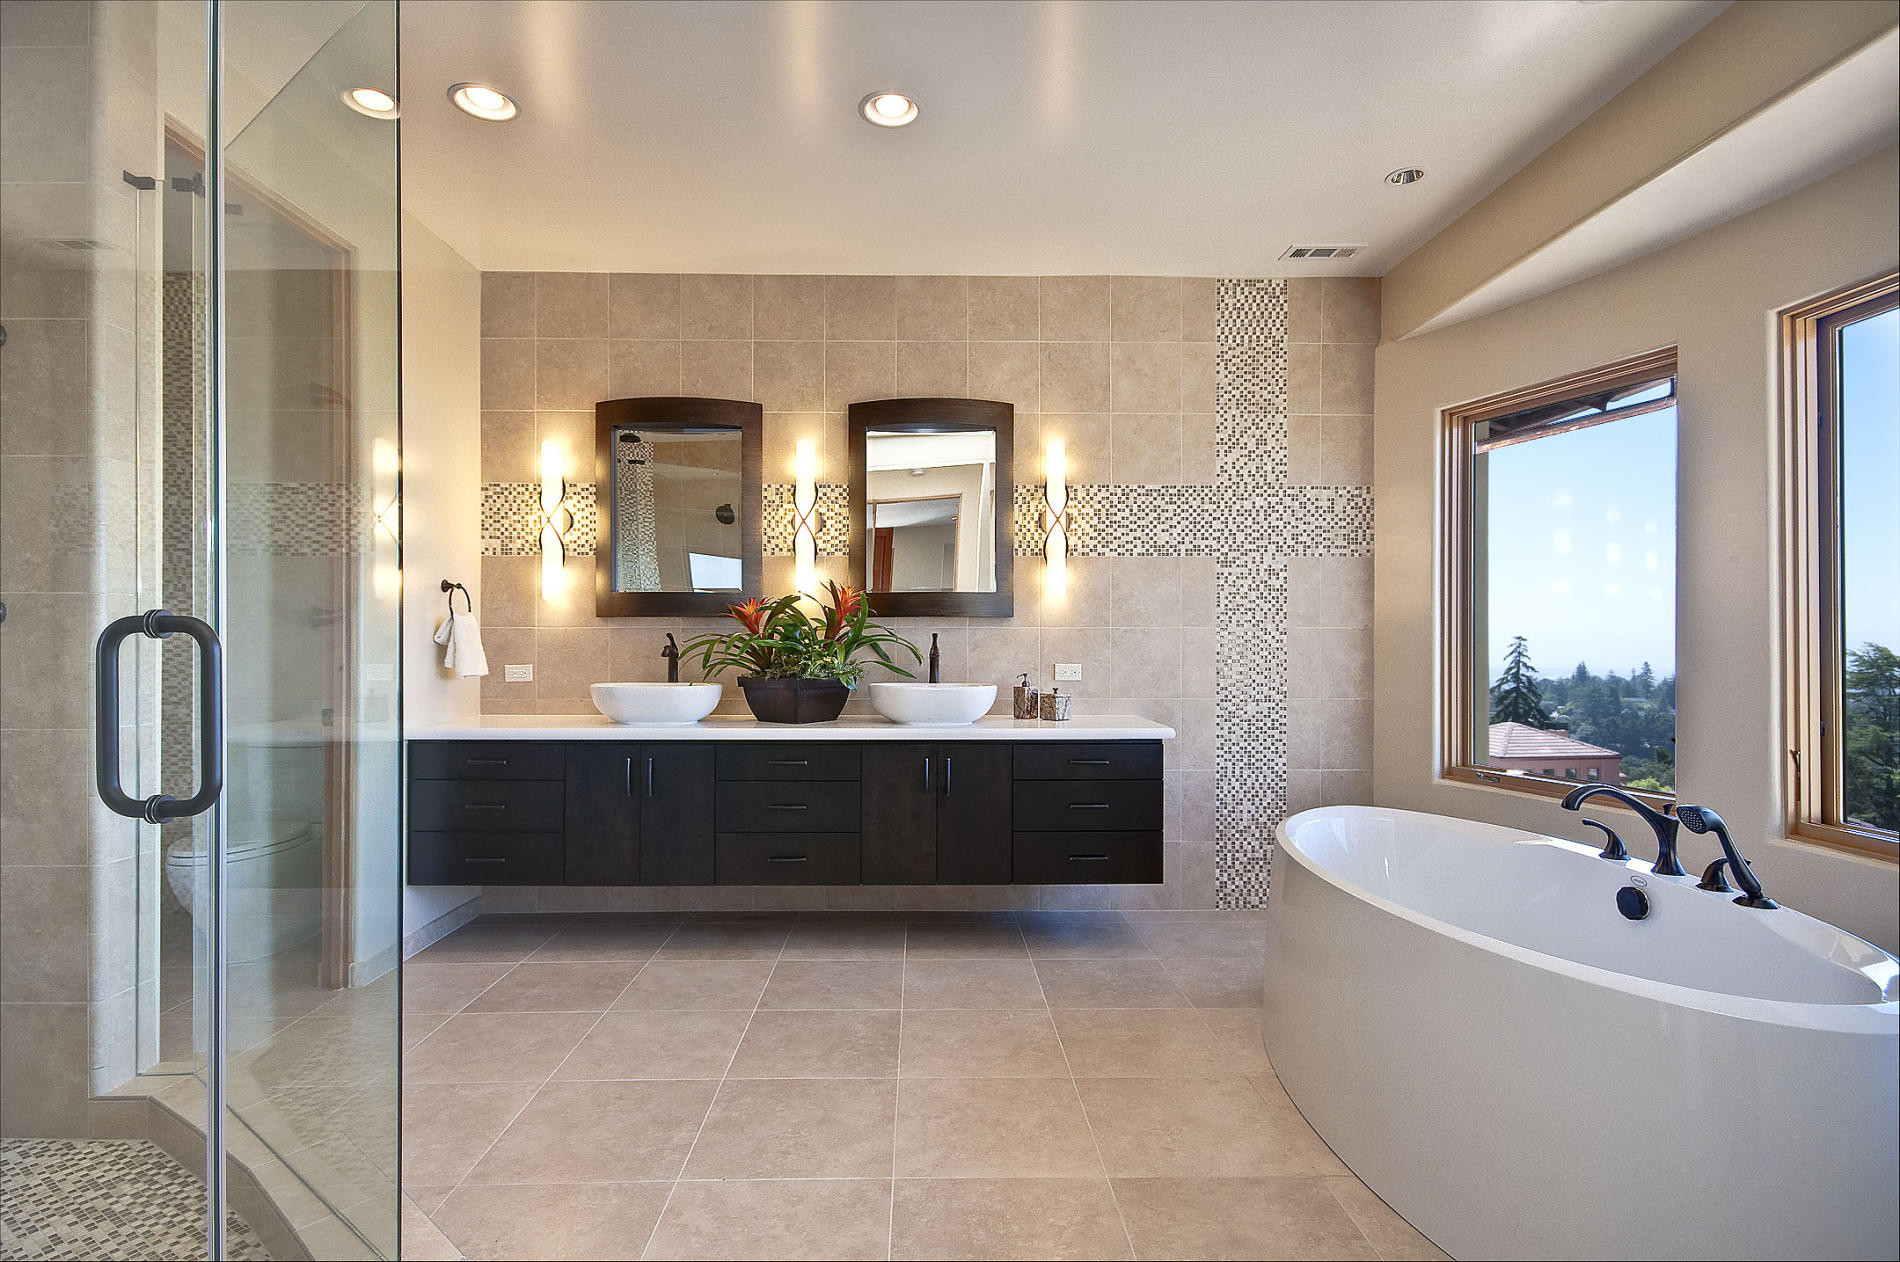 Master Bathroom Layout Plans
 Why You Should Planning Master Bathroom Layouts MidCityEast